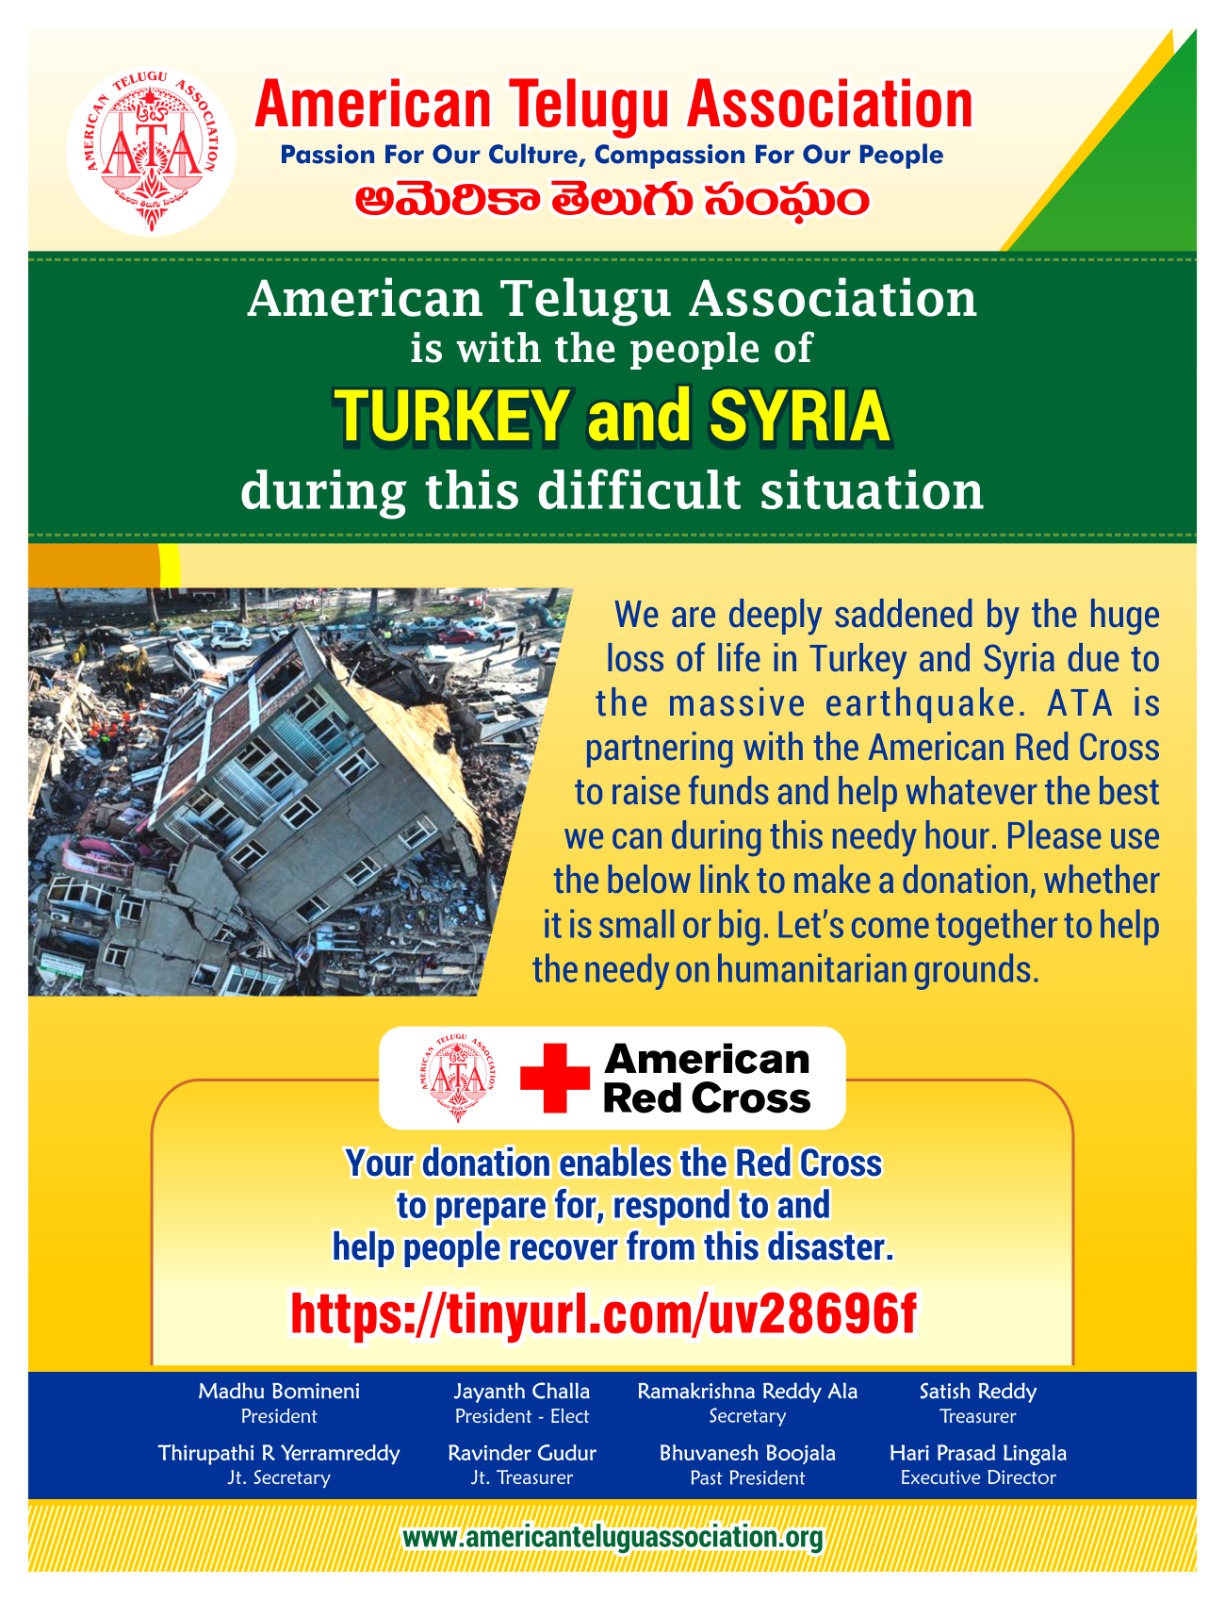 ATA & Red Cross Partner to Help Turkey-Syria Earthquake Disaster Victims